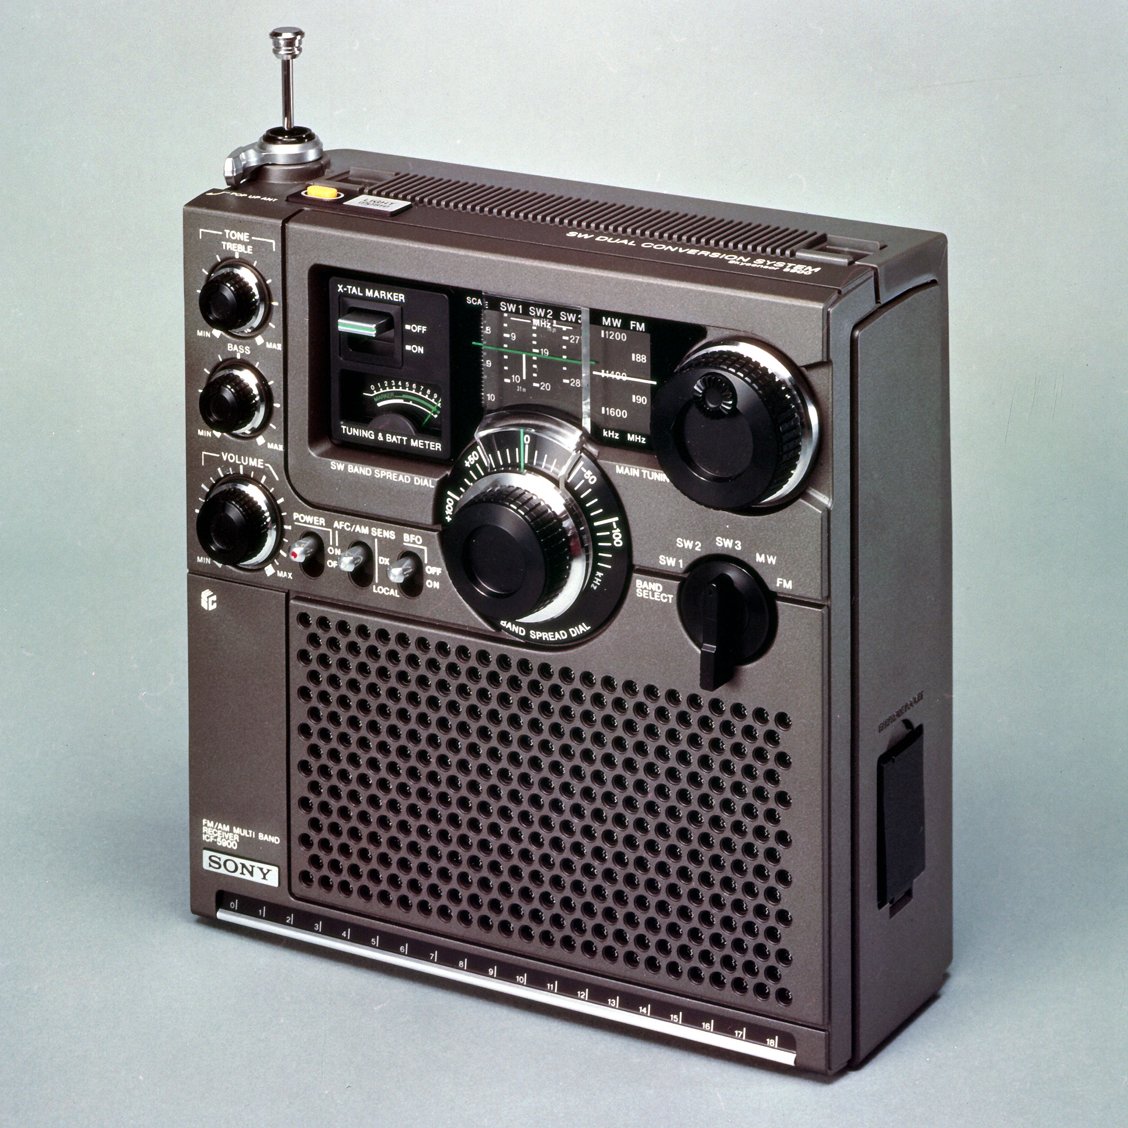 The Sony ICF-5900W, dubbed the 'Sky Sensor,' is a 1975 shortwave receiver prized for its precise tuning despite its complexity. It's a sought-after collector's item and a milestone in shortwave travel receiver advancement.